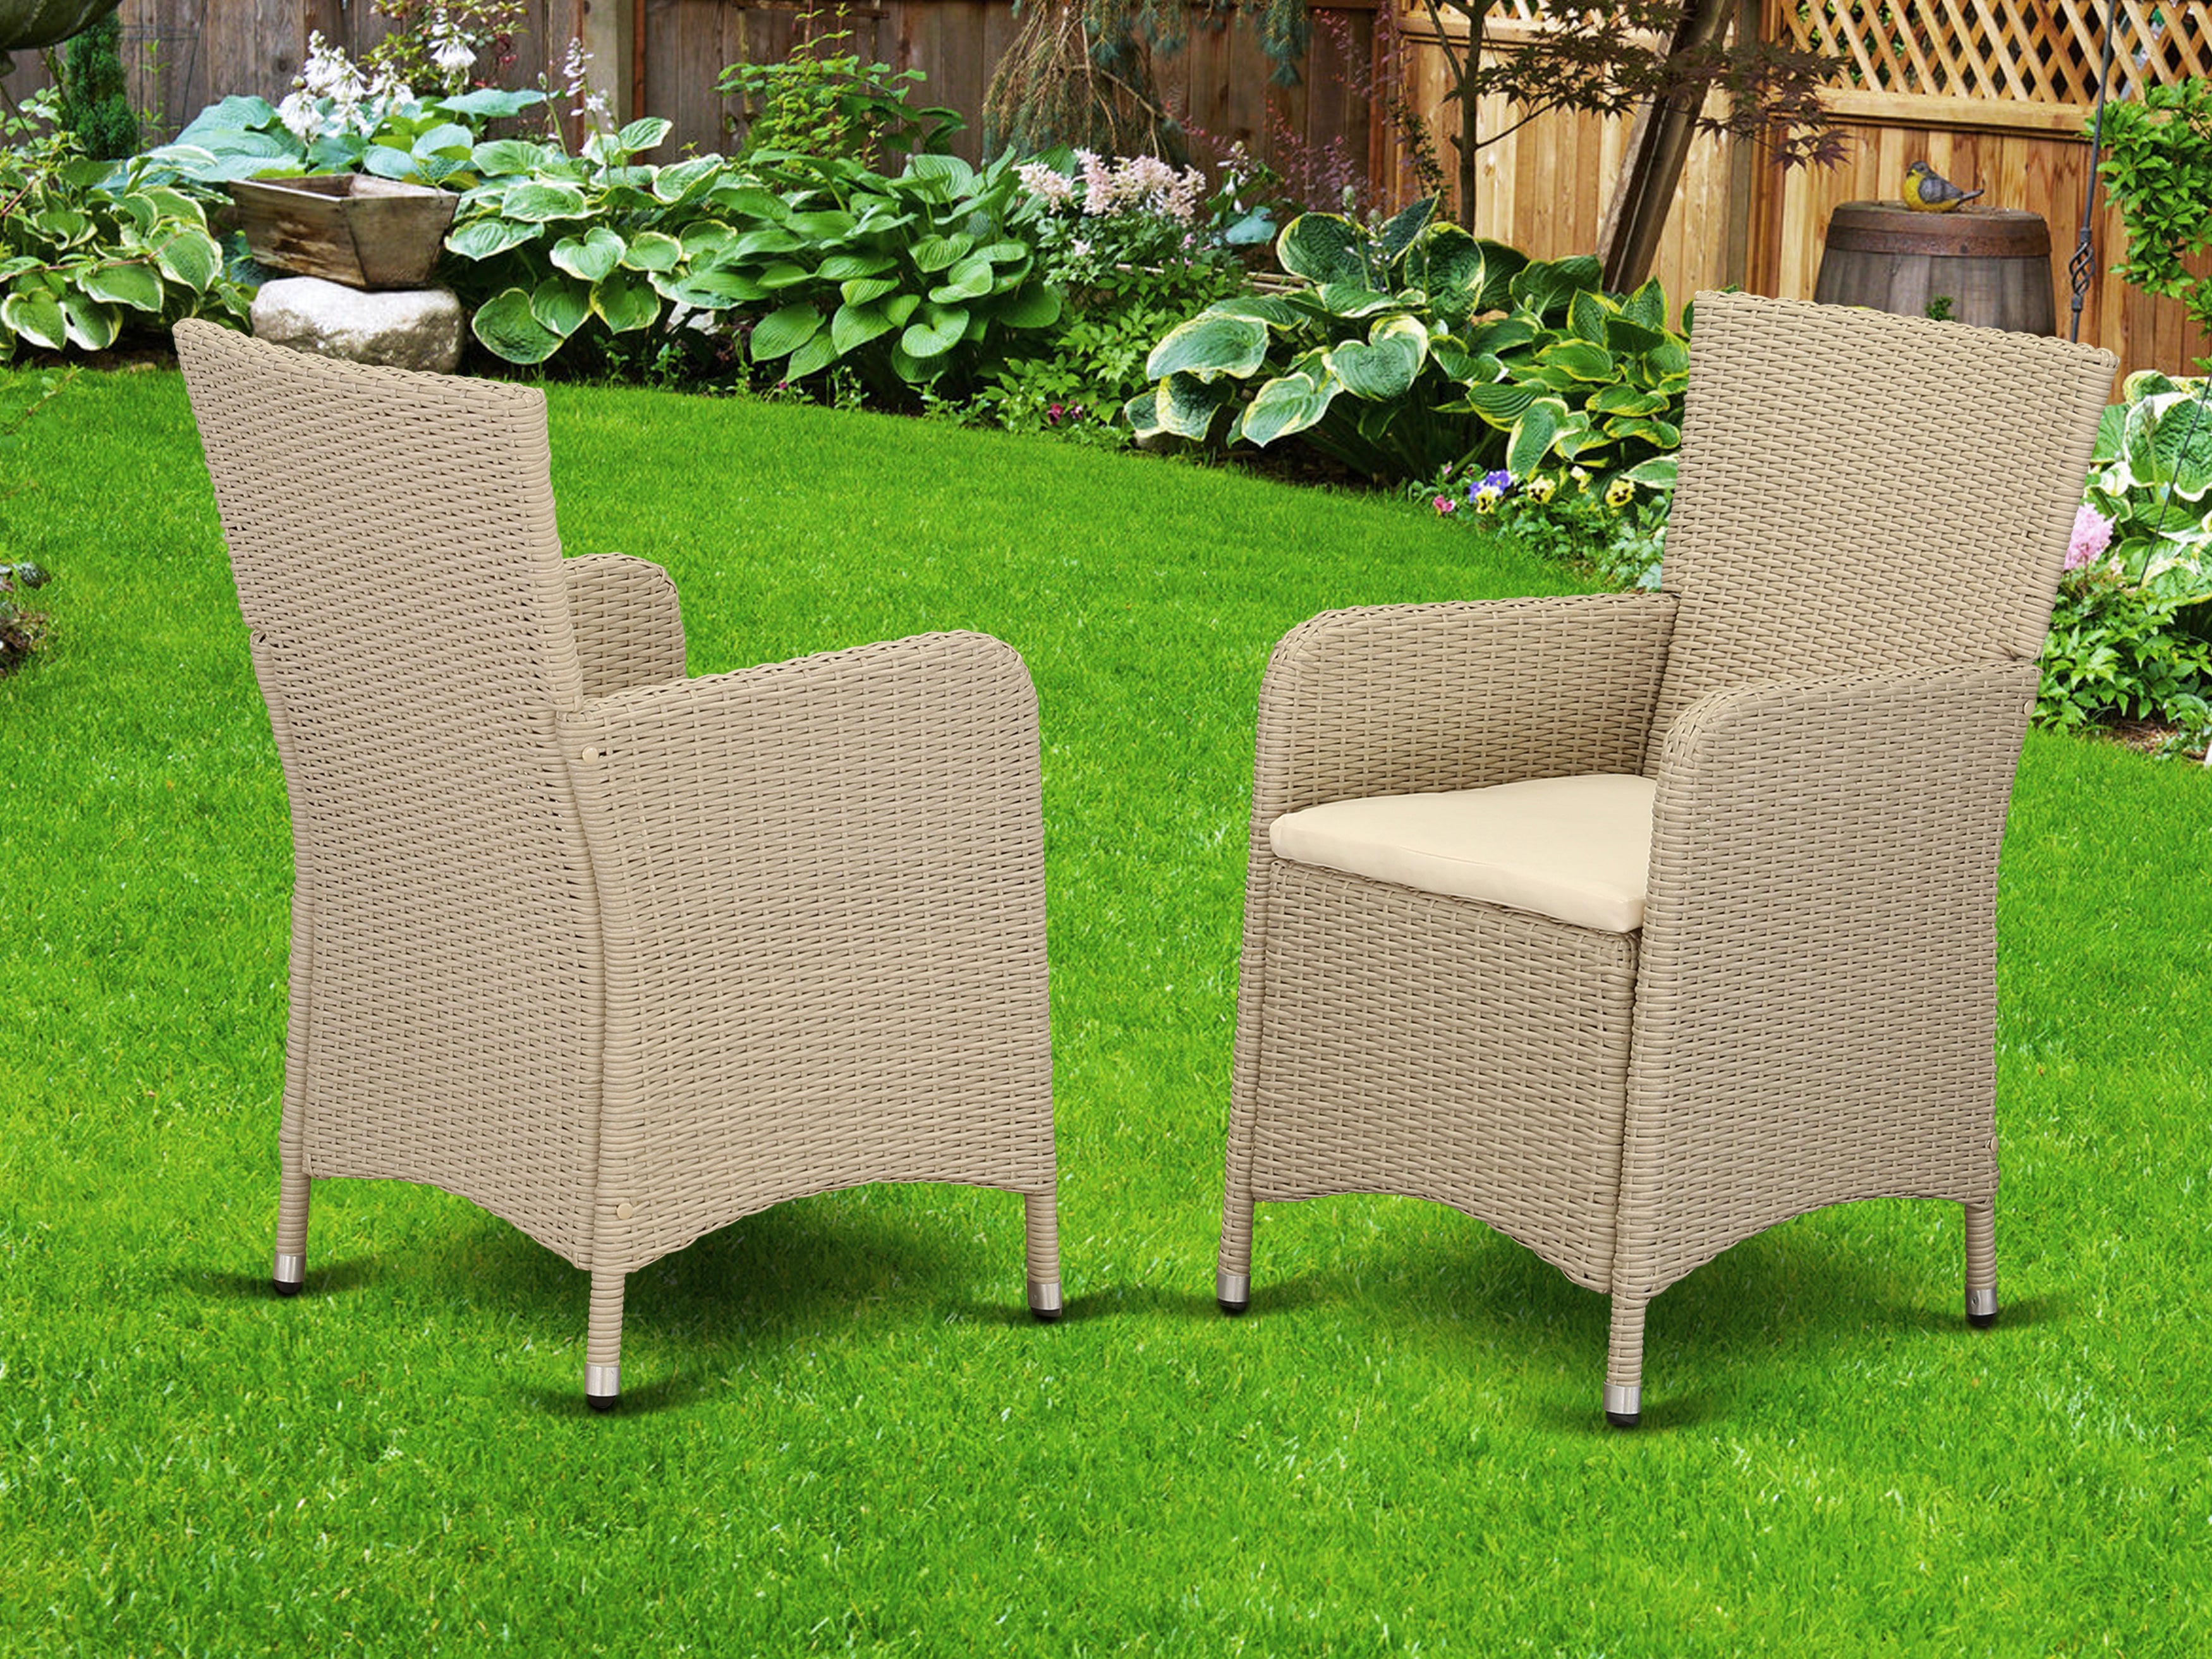 Luneburg Patio Bistro Wicker Dining Chairs with Cushion, Set of 2, Cream